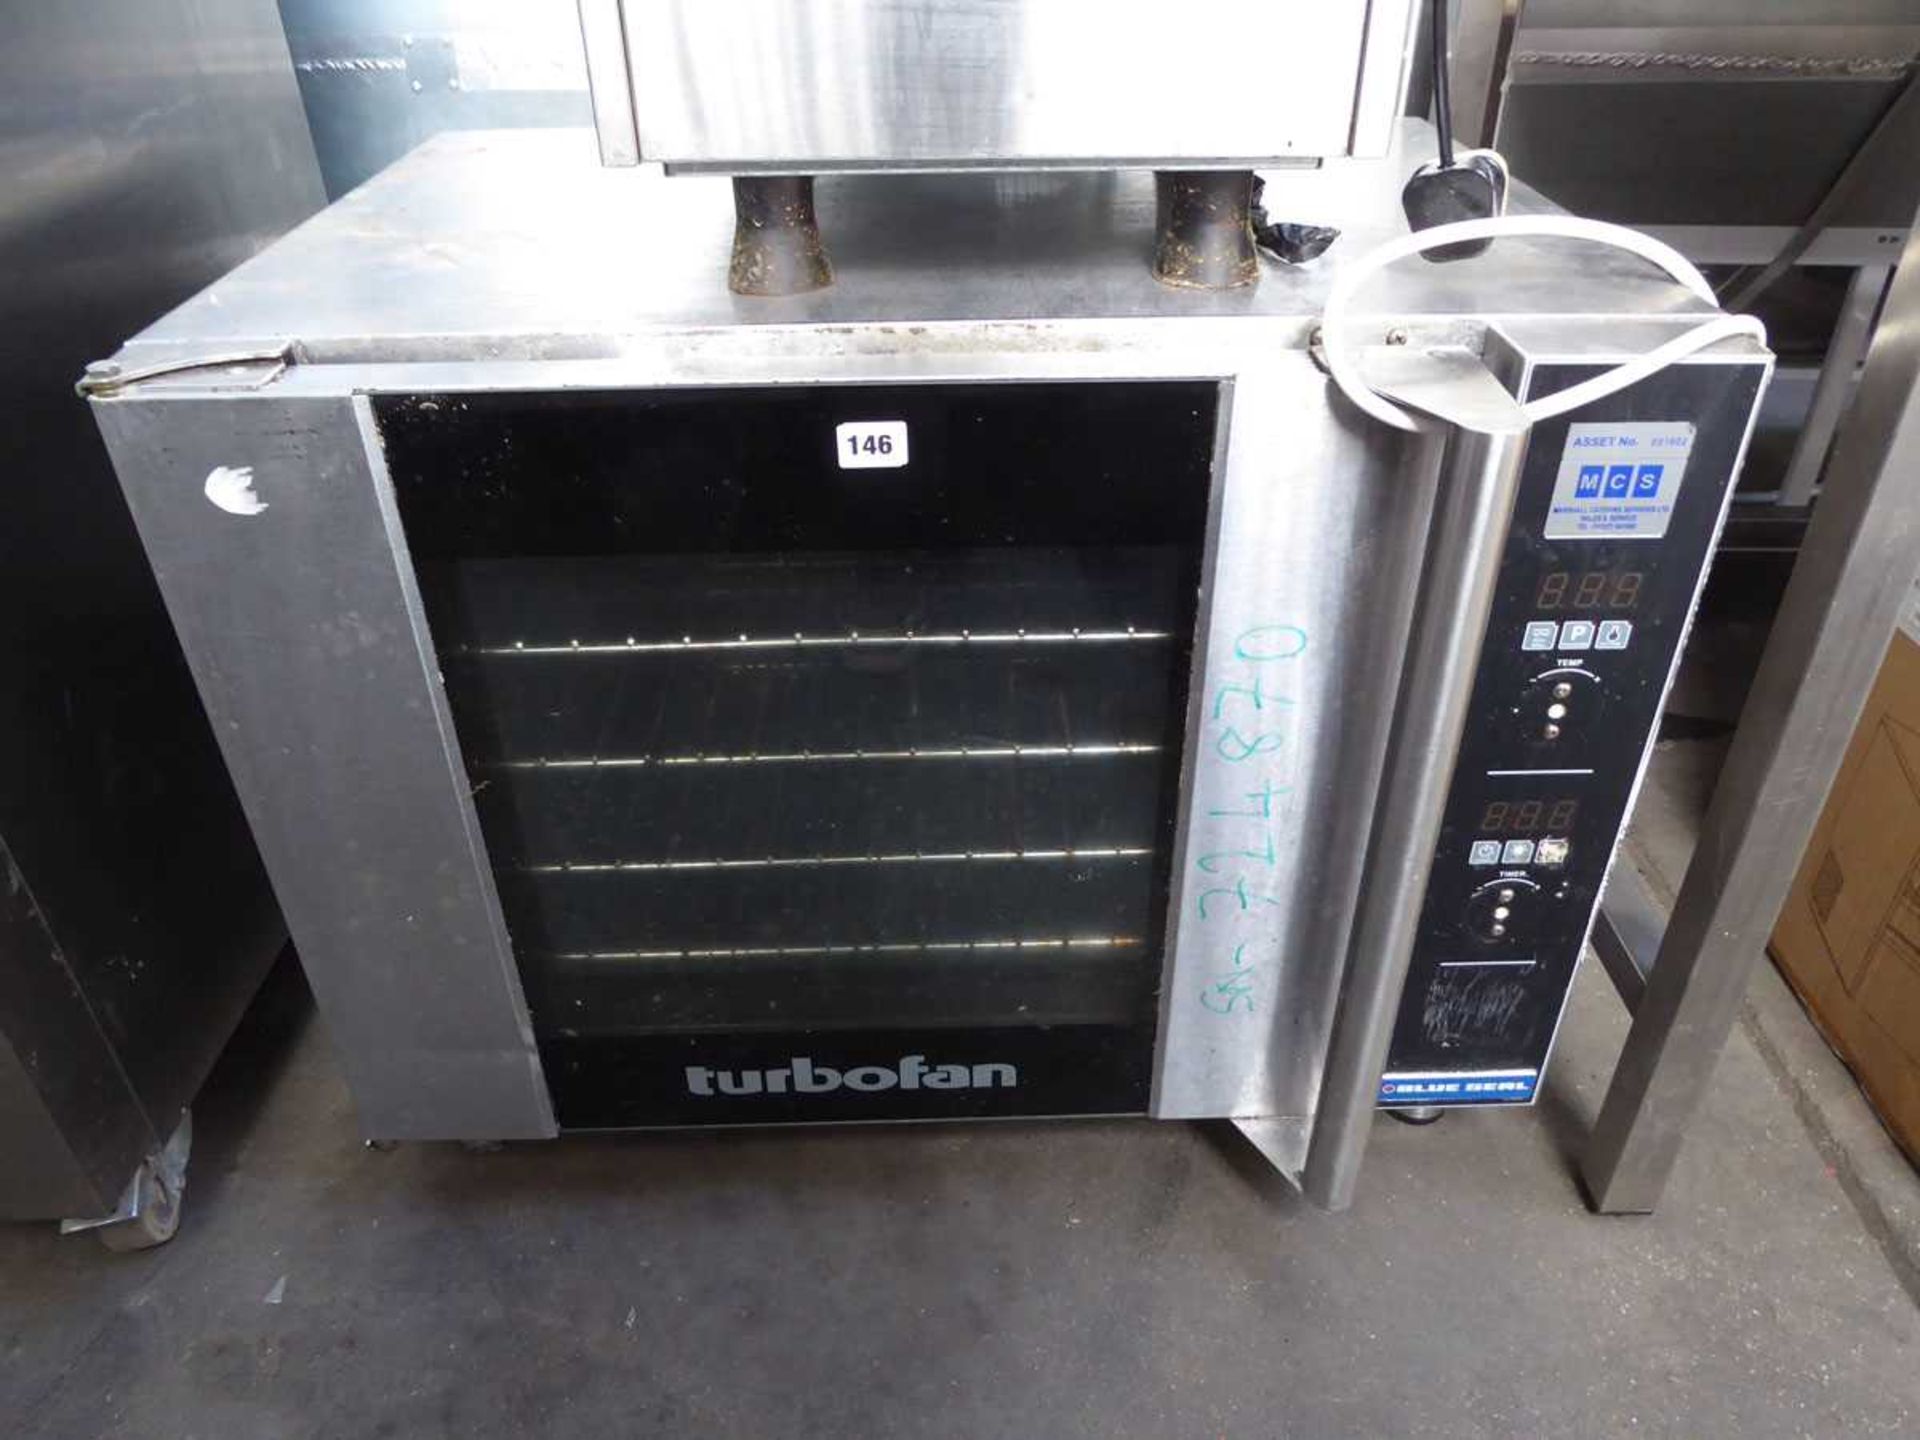 80cm electric Blue Seal turbo fan bench top oven